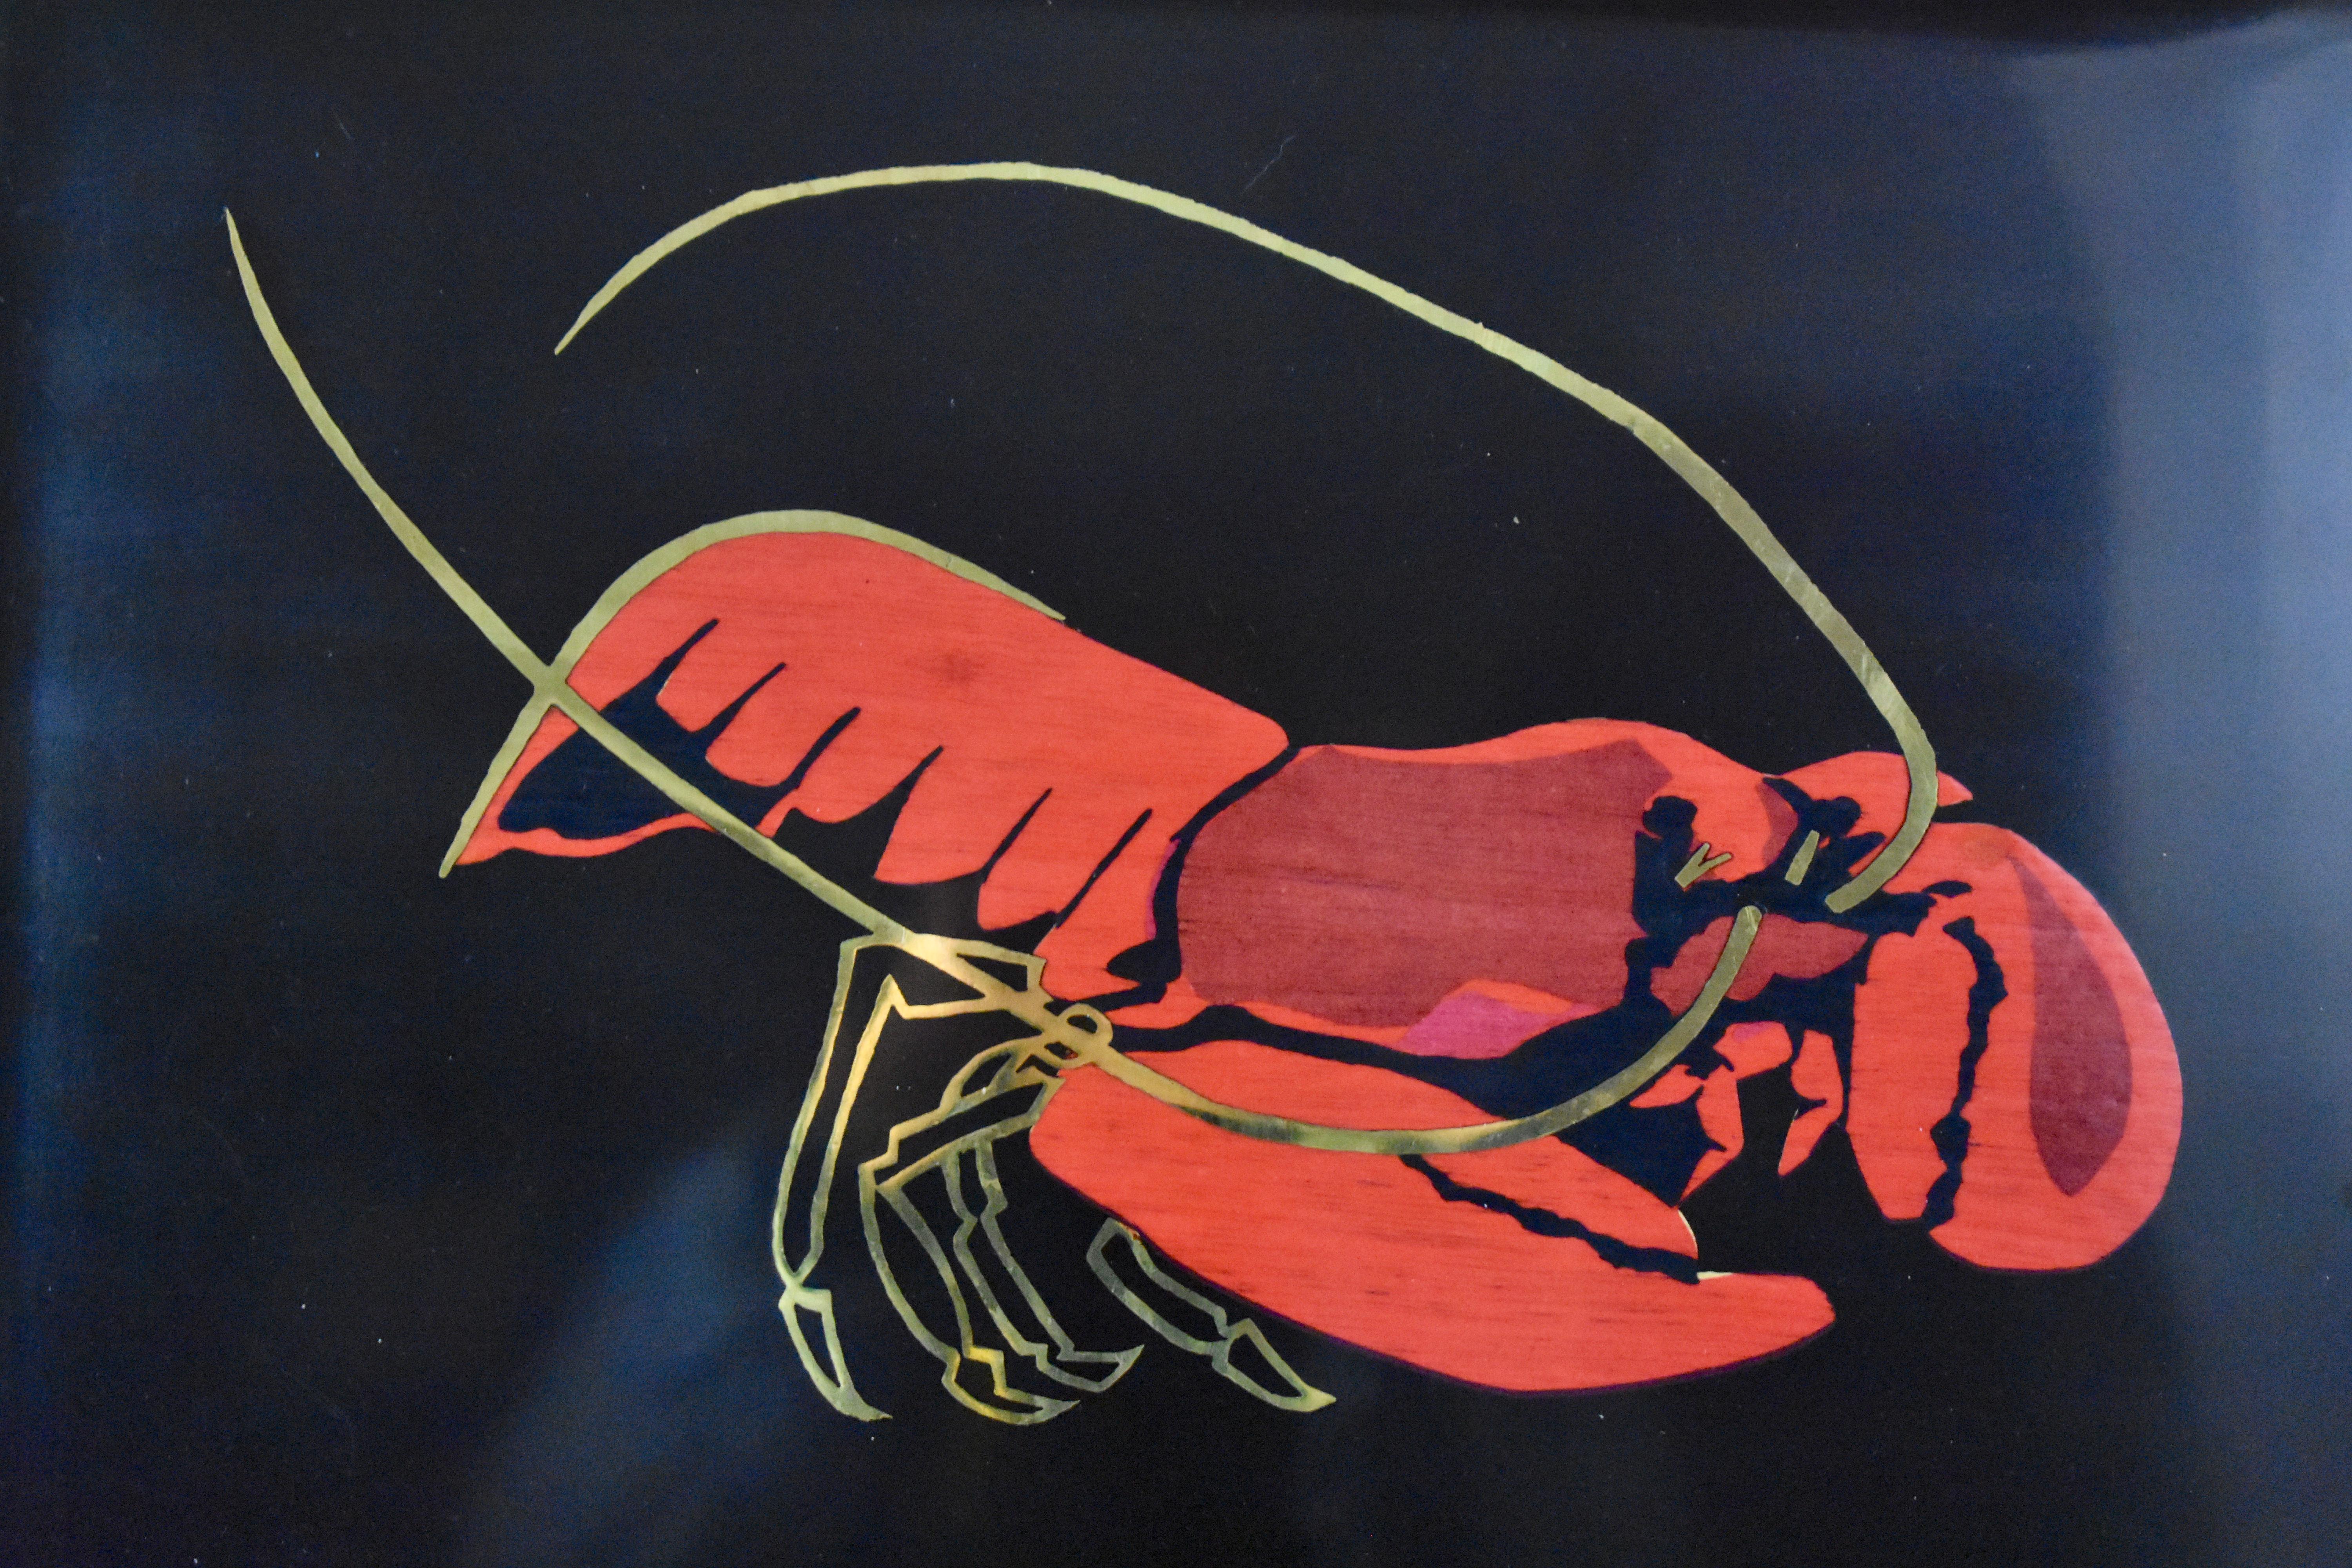 A Mid-Century Modern Era serving tray by Couroc of Monterey, California, (1948-1998) – The Lobster pattern, circa 1960s.

Made of a black resin called ‘Phenolic’ and hand inlaid with the image of a lobster in red dyed wood and brass accents. With